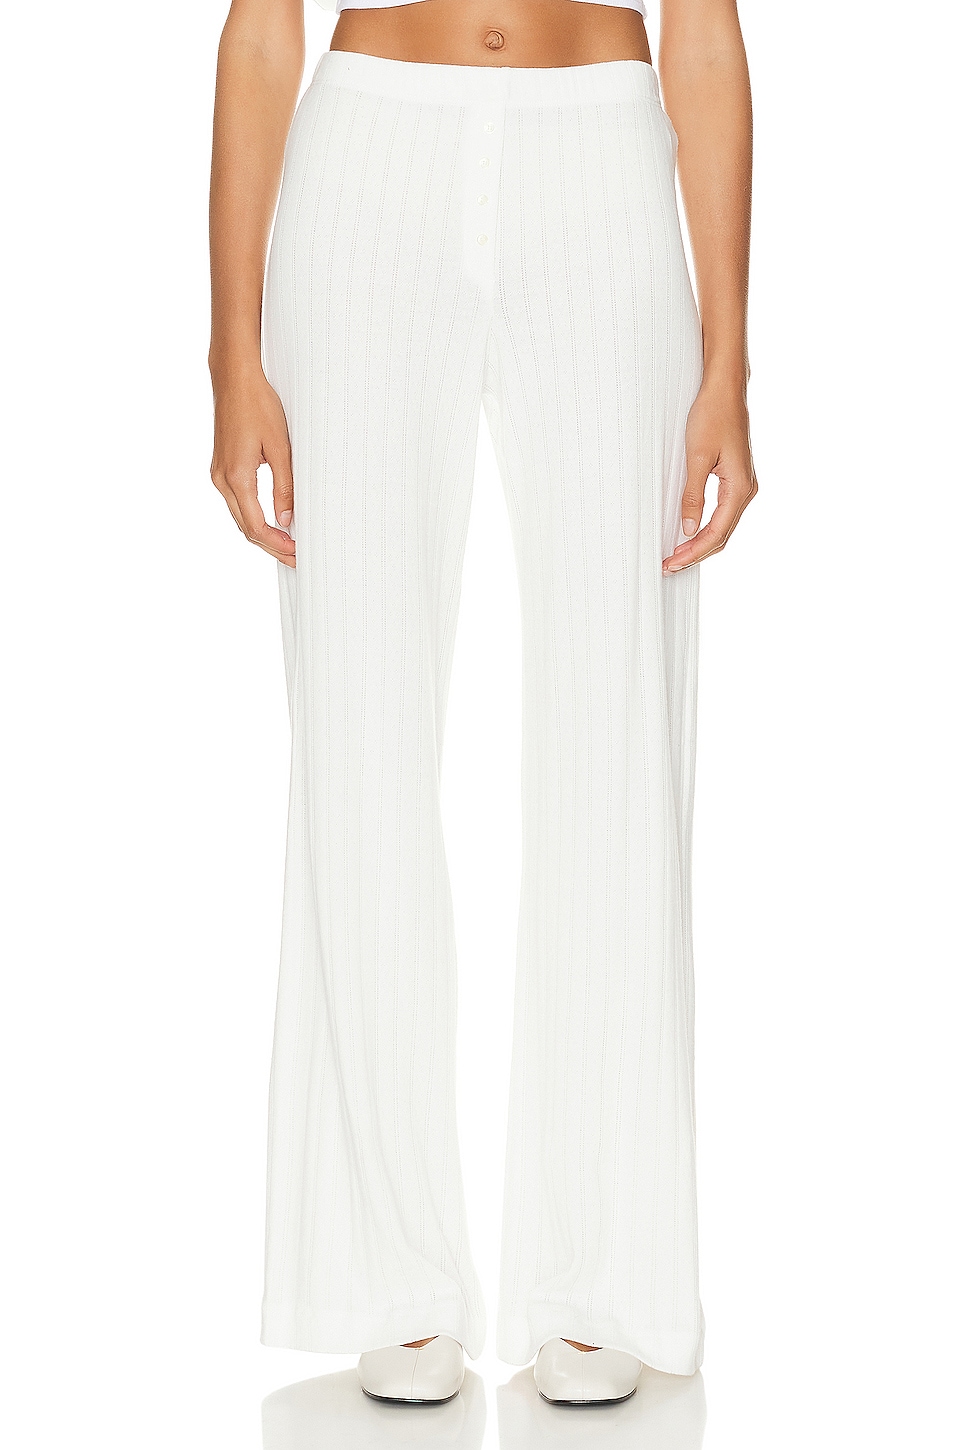 Image 1 of LESET Pointelle Boxer Pant in White